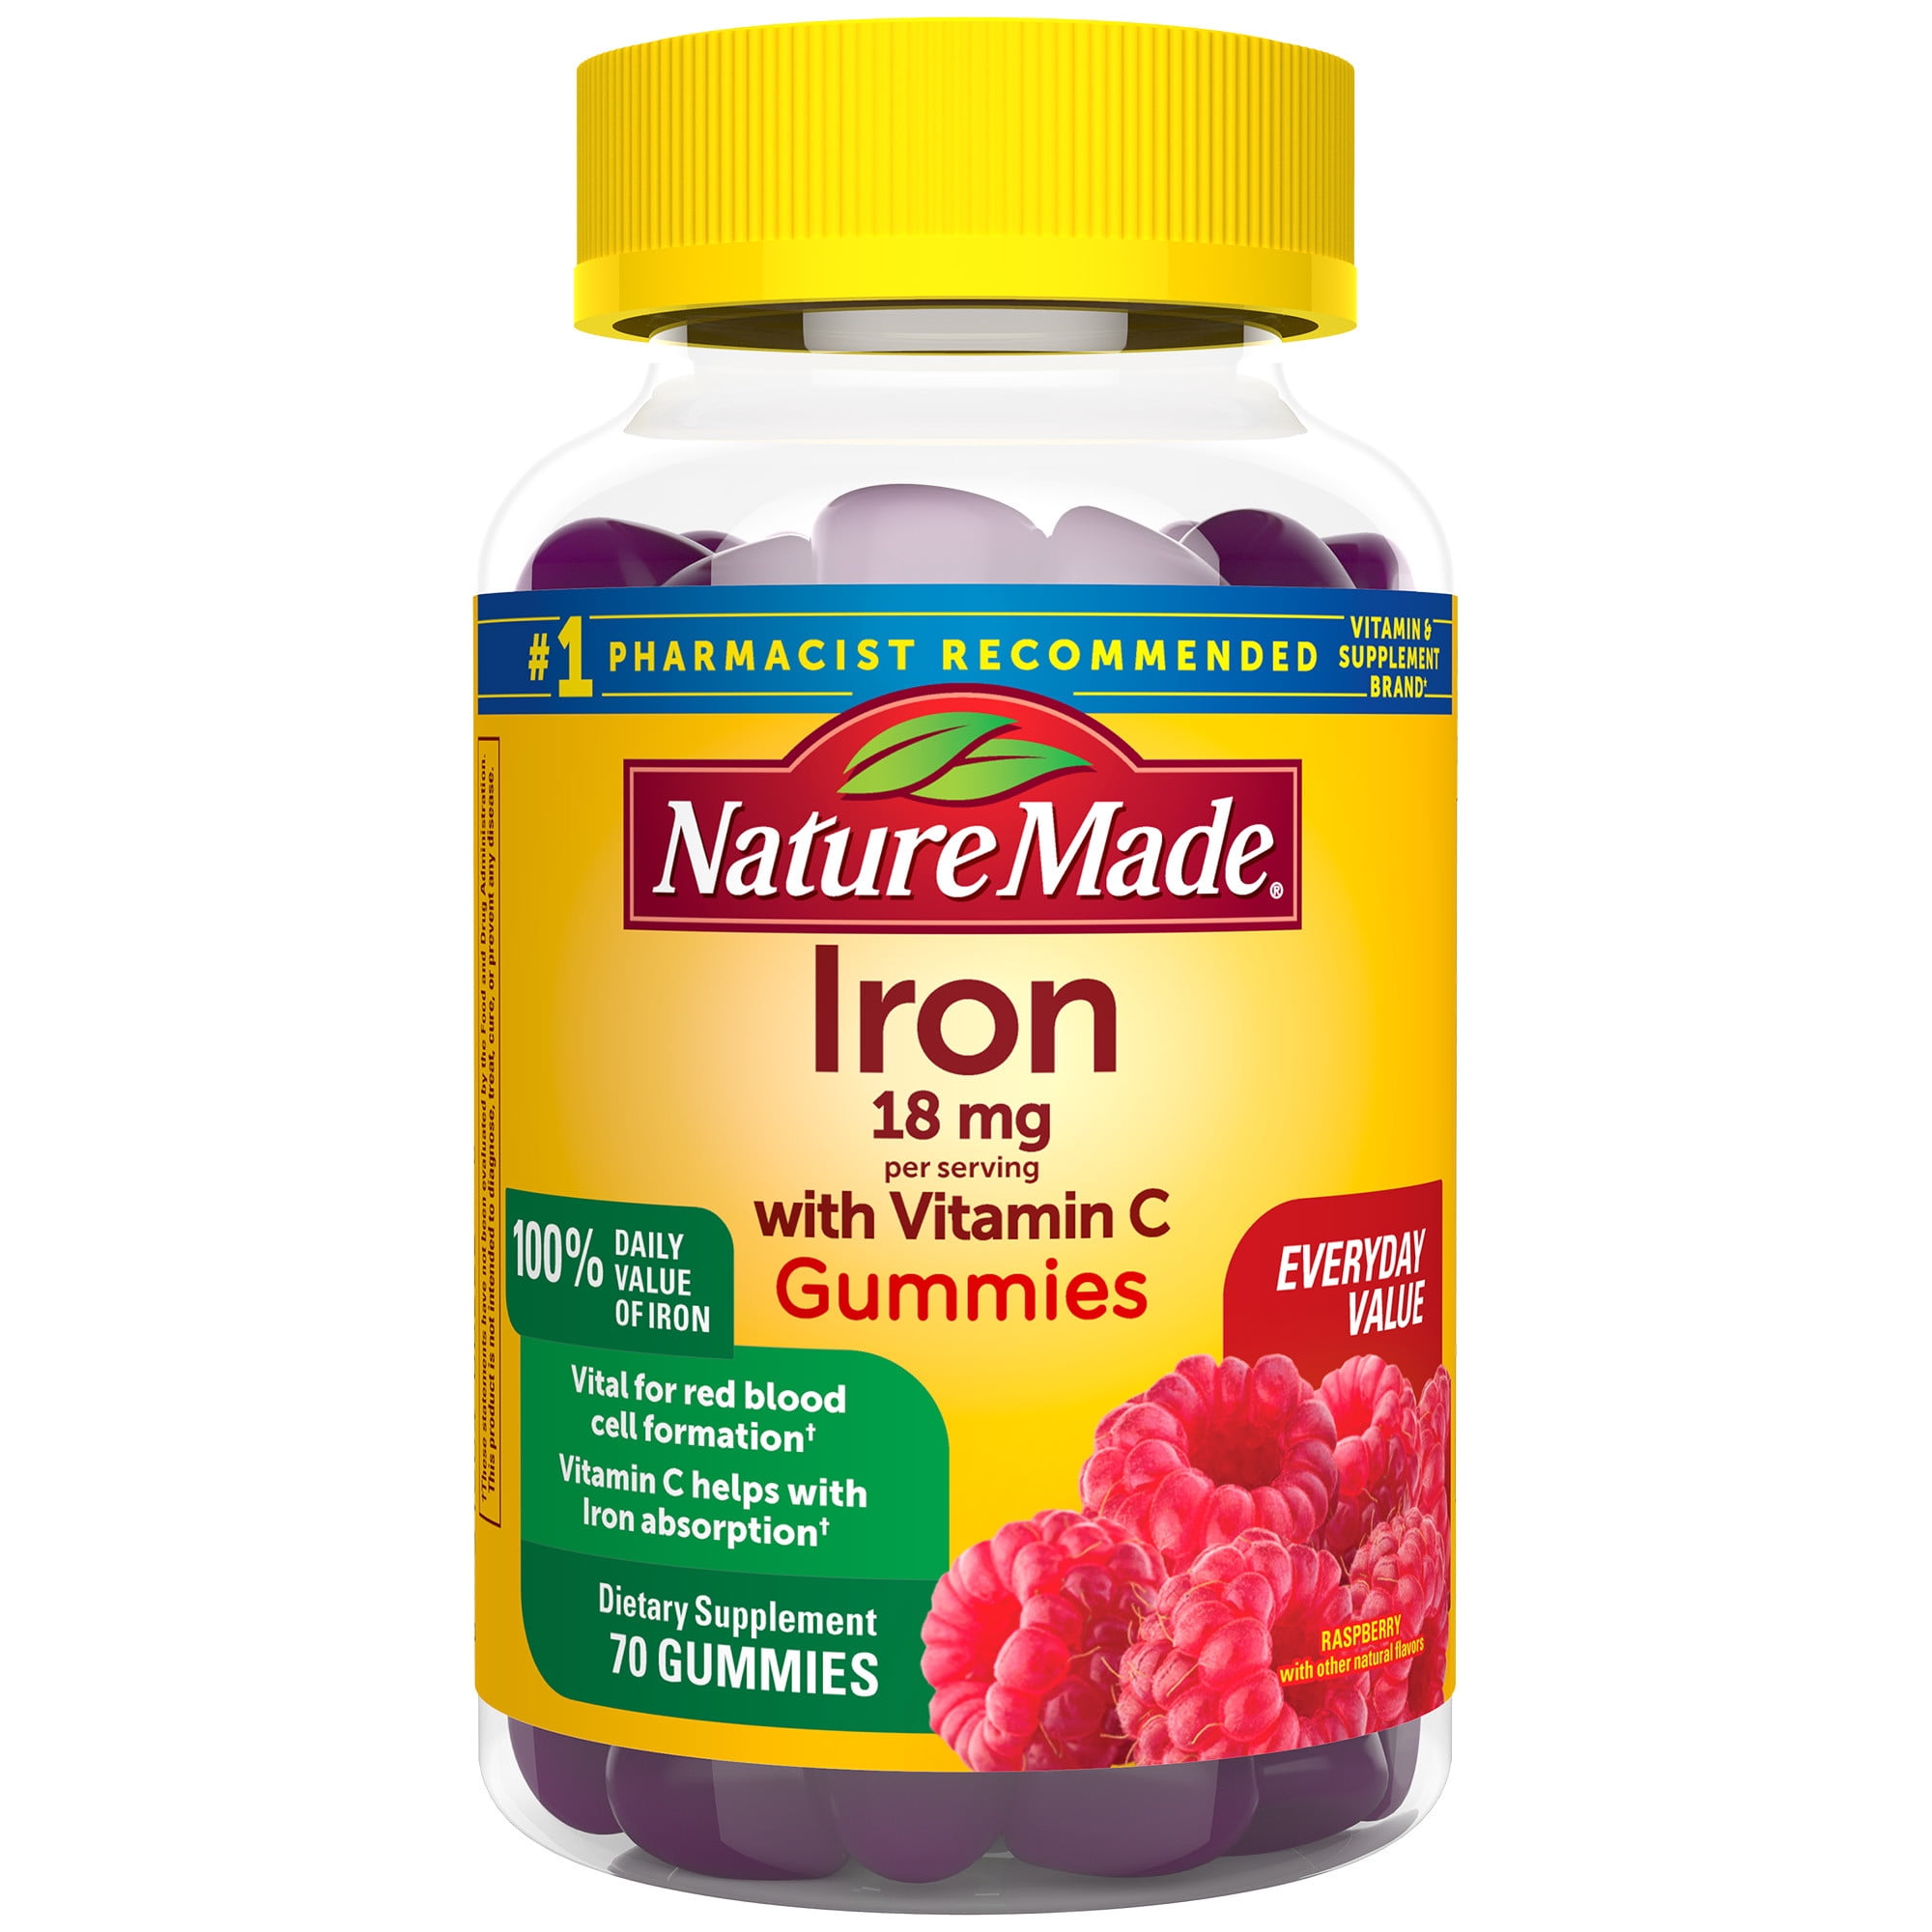 Nature Made Iron 18 mg Per Serving with Vitamin C Gummies, Dietary ...